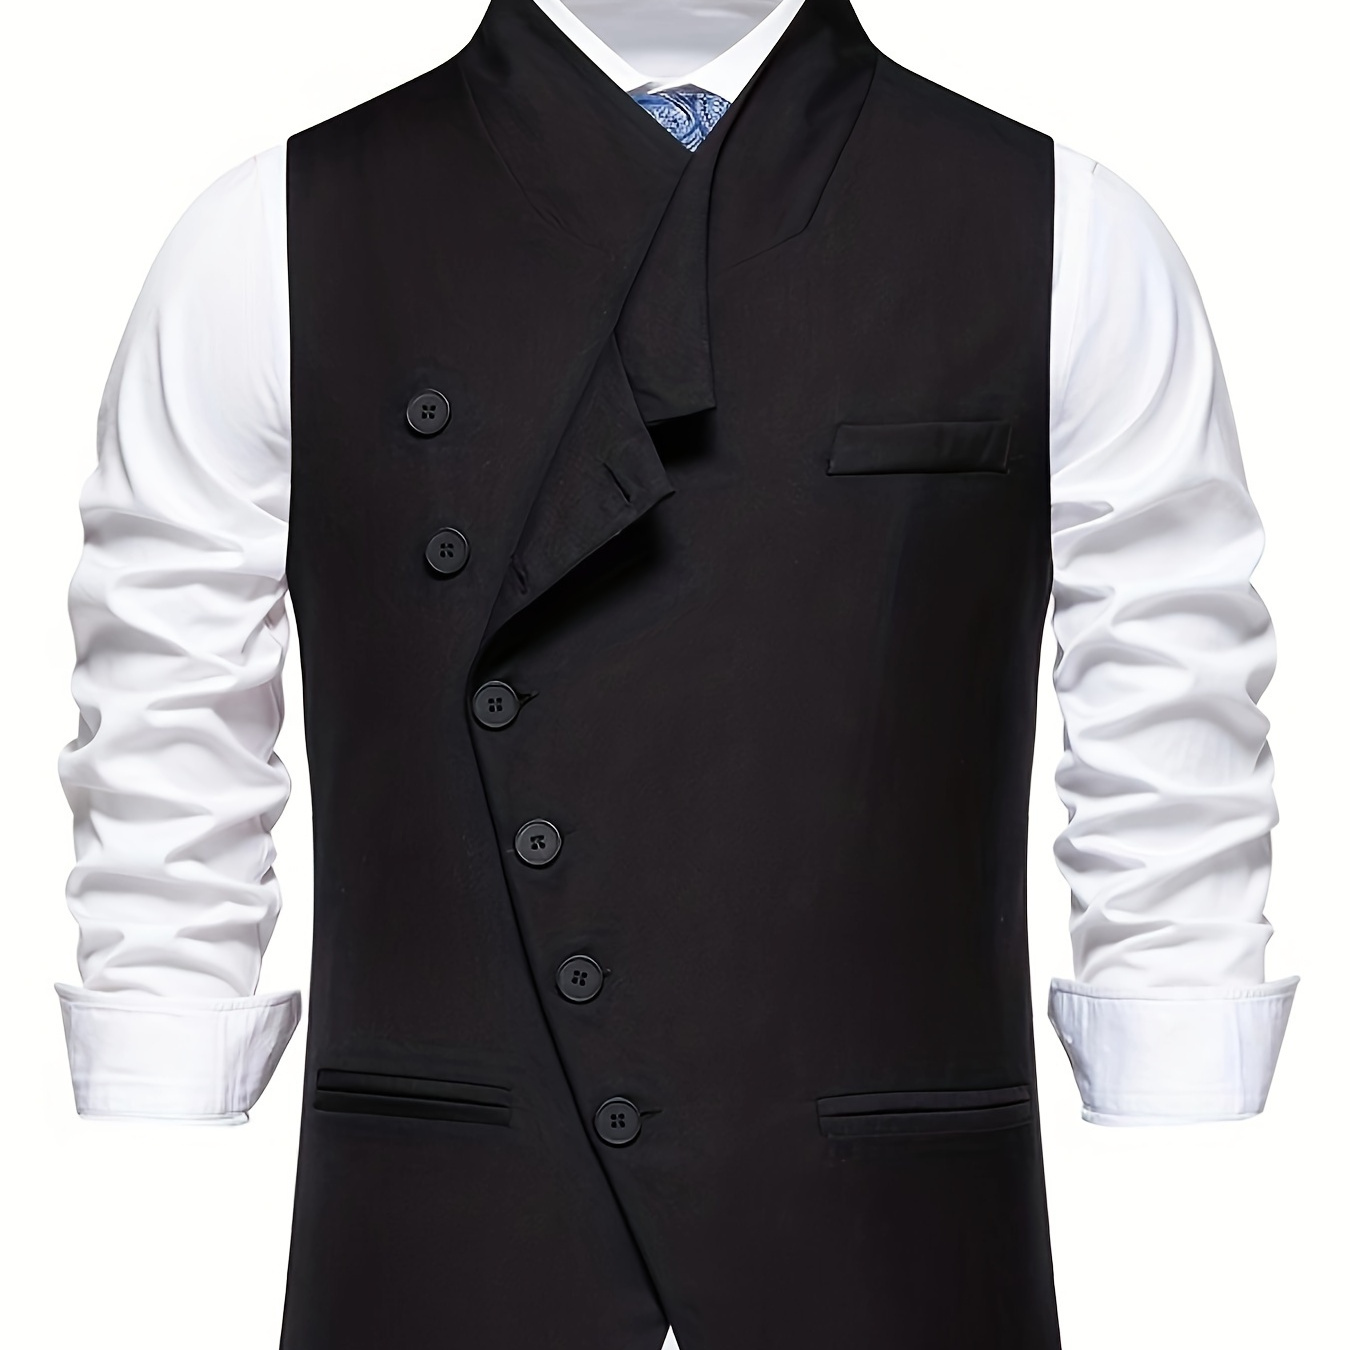 

Men's Casual Slant Single Breasted Dress Waistcoat, Chic V Neck Vest For Performance Wedding Party